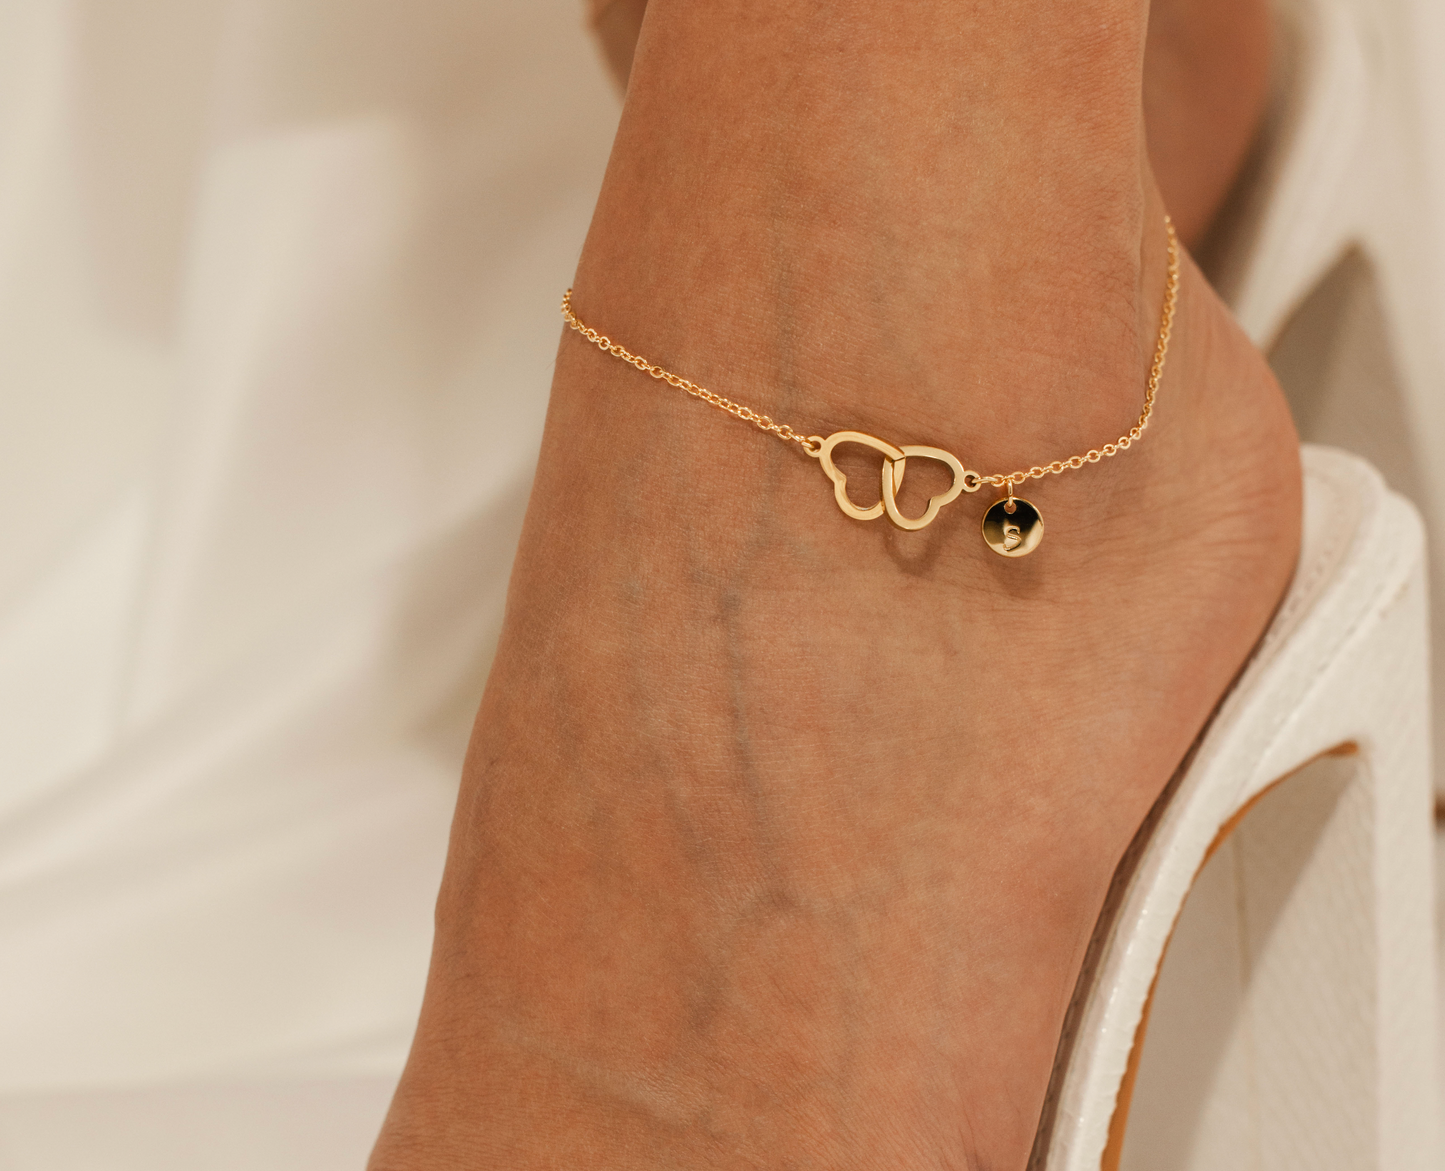 Personalized Two Hearts Anklet with Hand stamped initial engraving